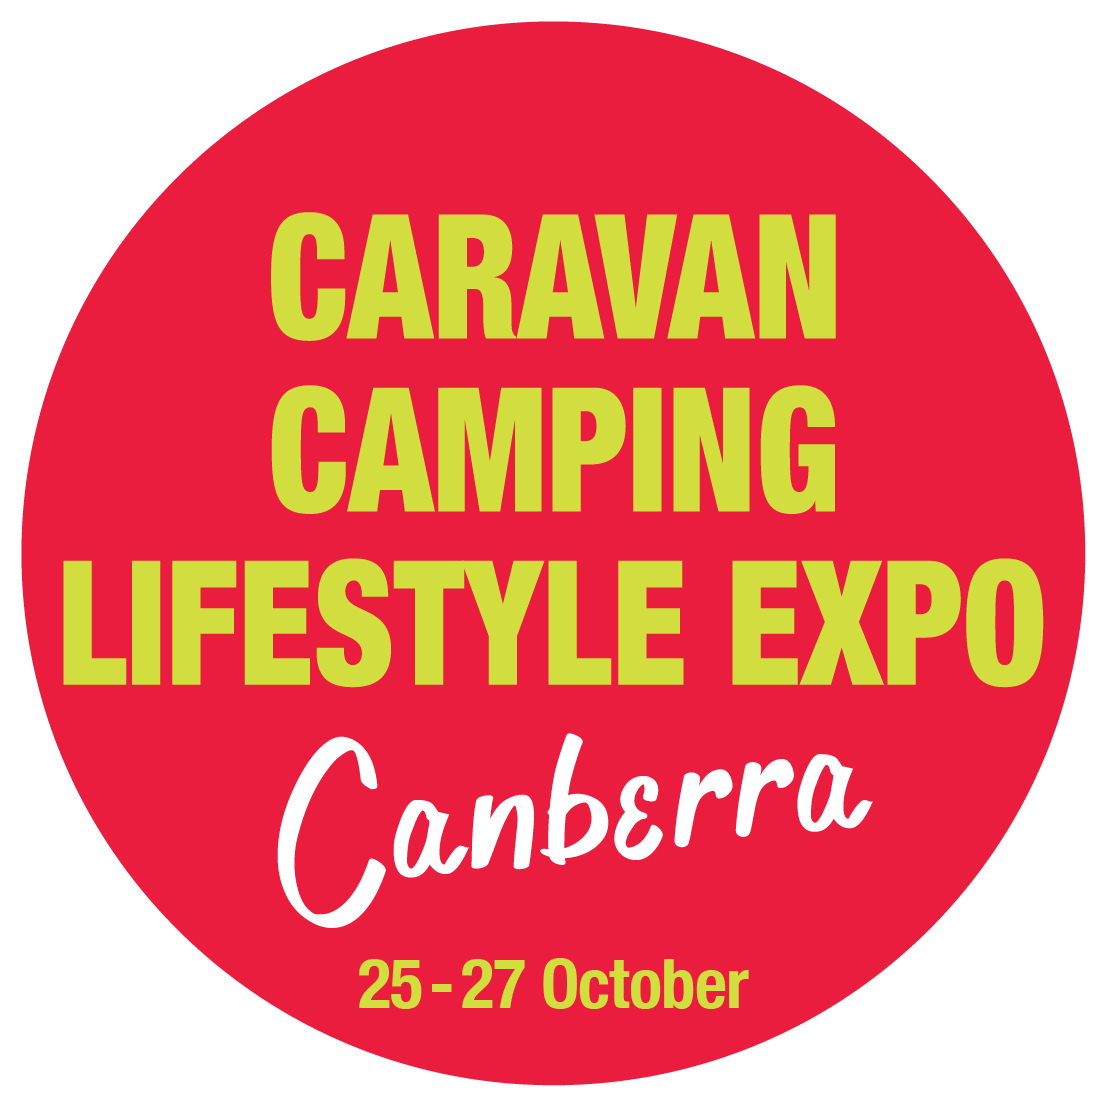 Caravan Camping Lifestyle Expo 25 to 27 October Canberra